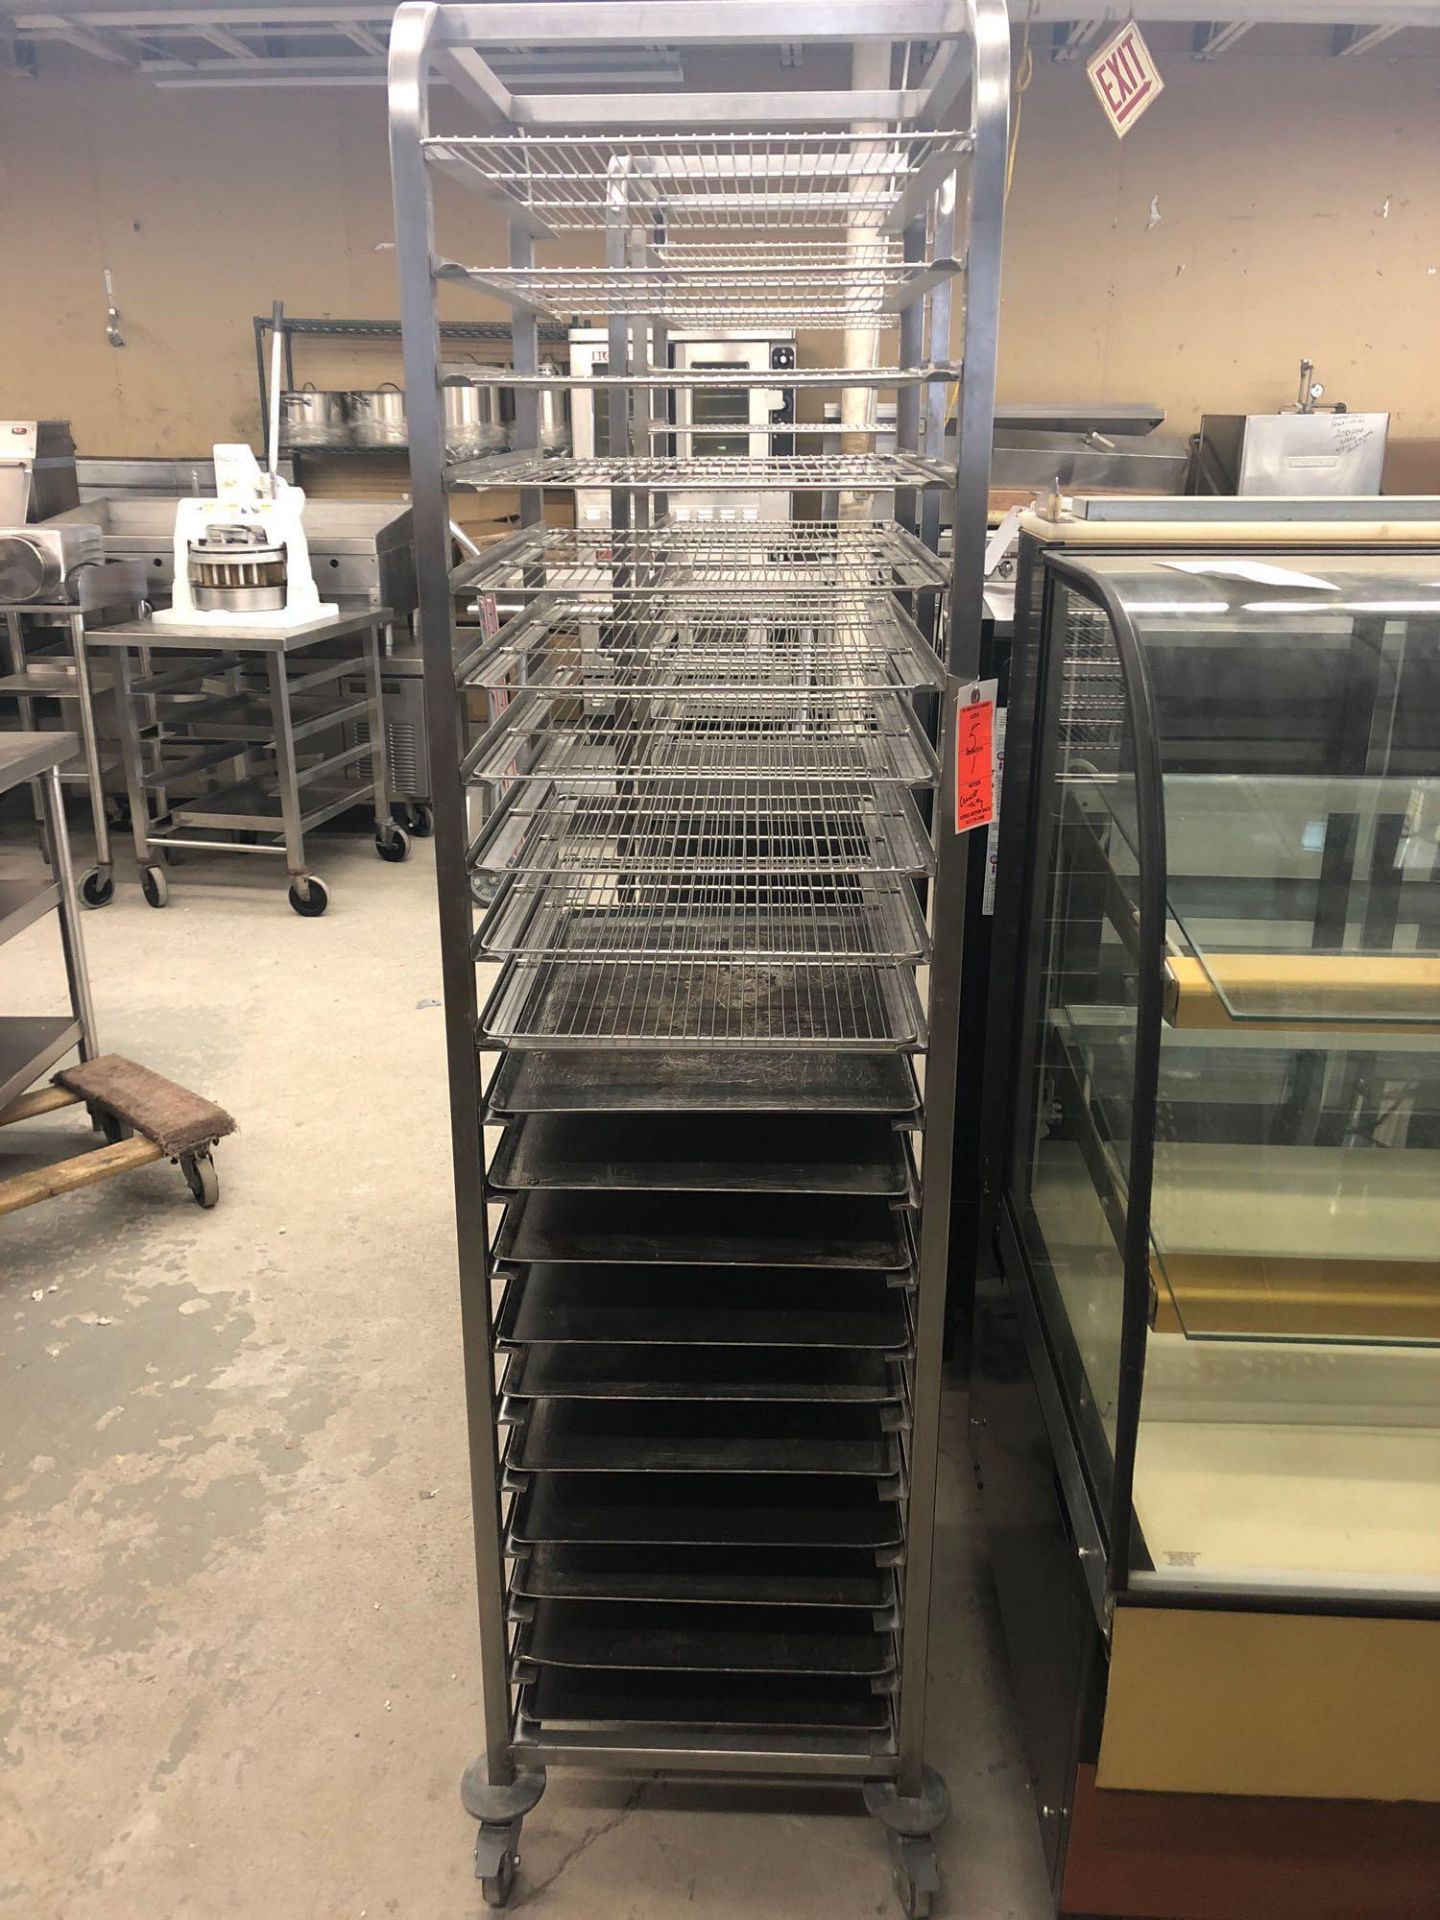 Stainless steel cookie rack with racks and trays